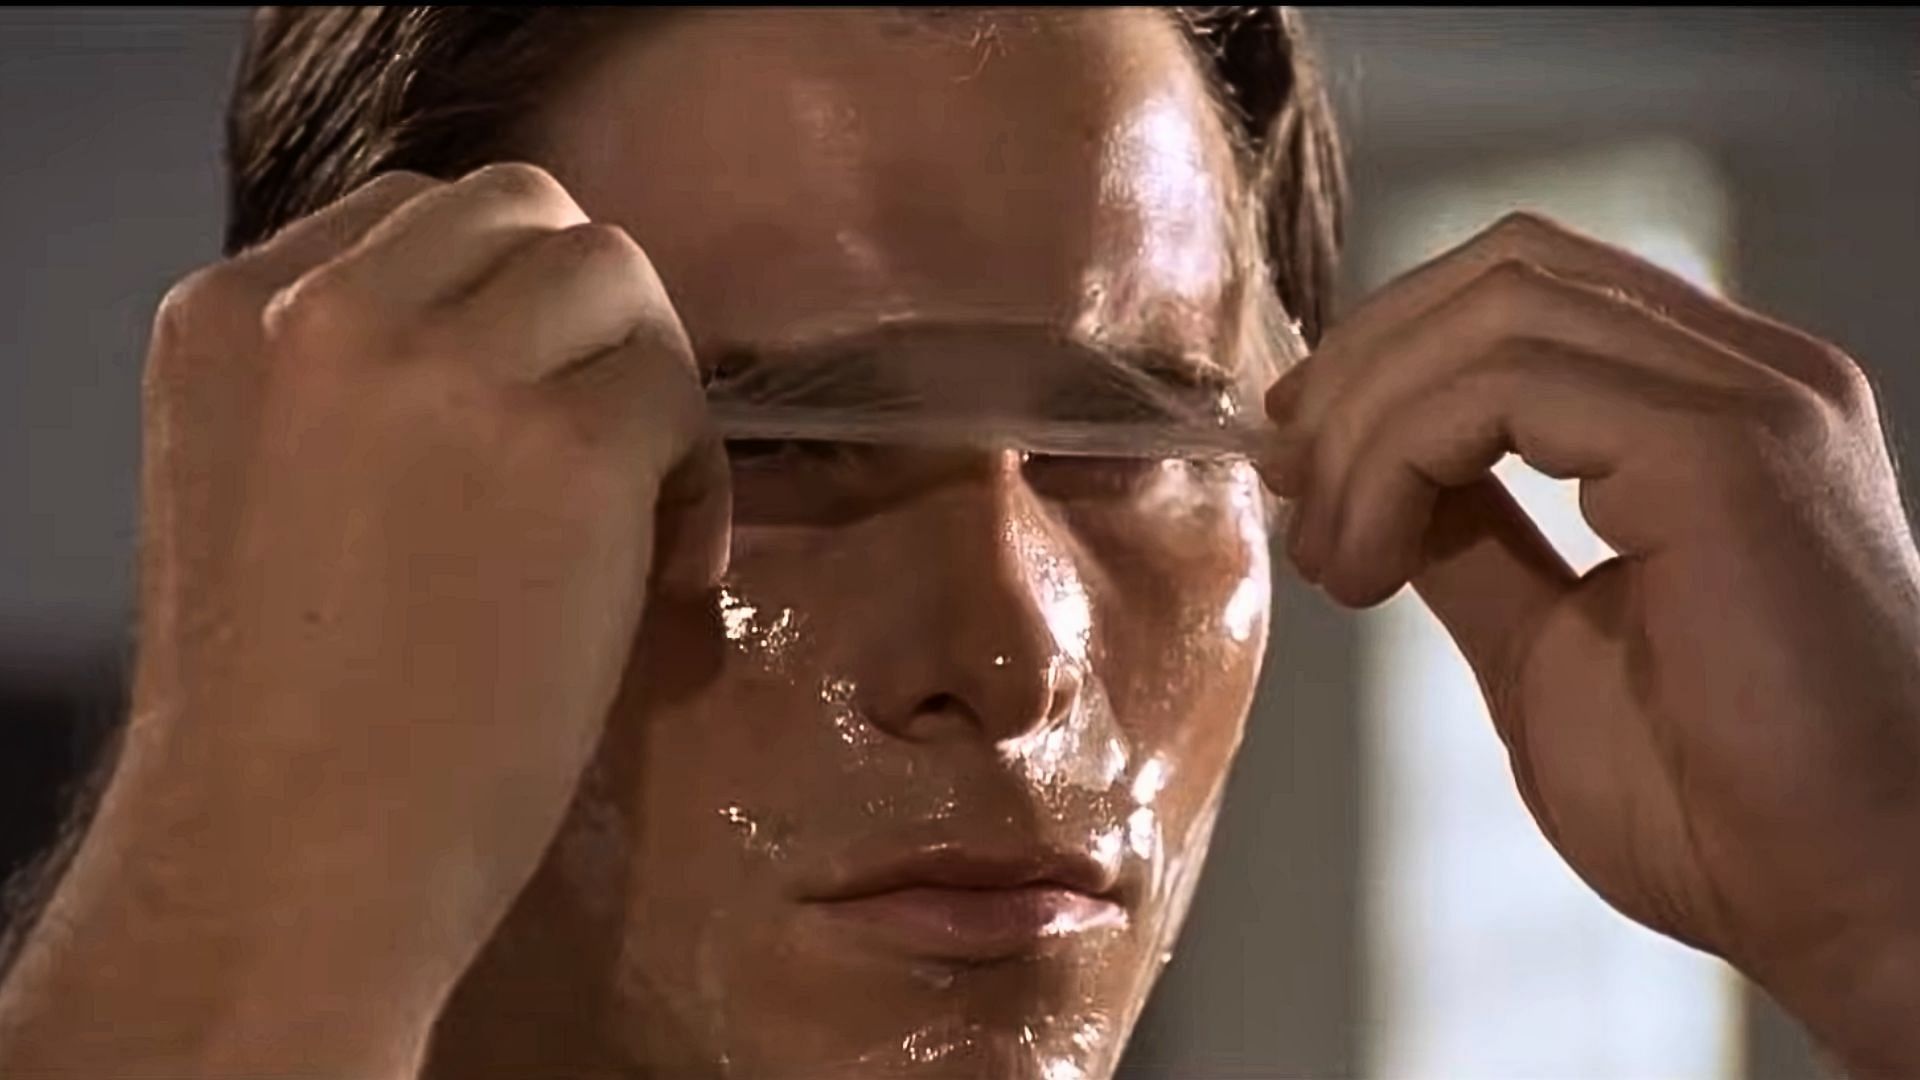 Christian Bale&#039;s character in American Psycho is Patrick Bateman (Image via YouTube/Lionsgate Movies)